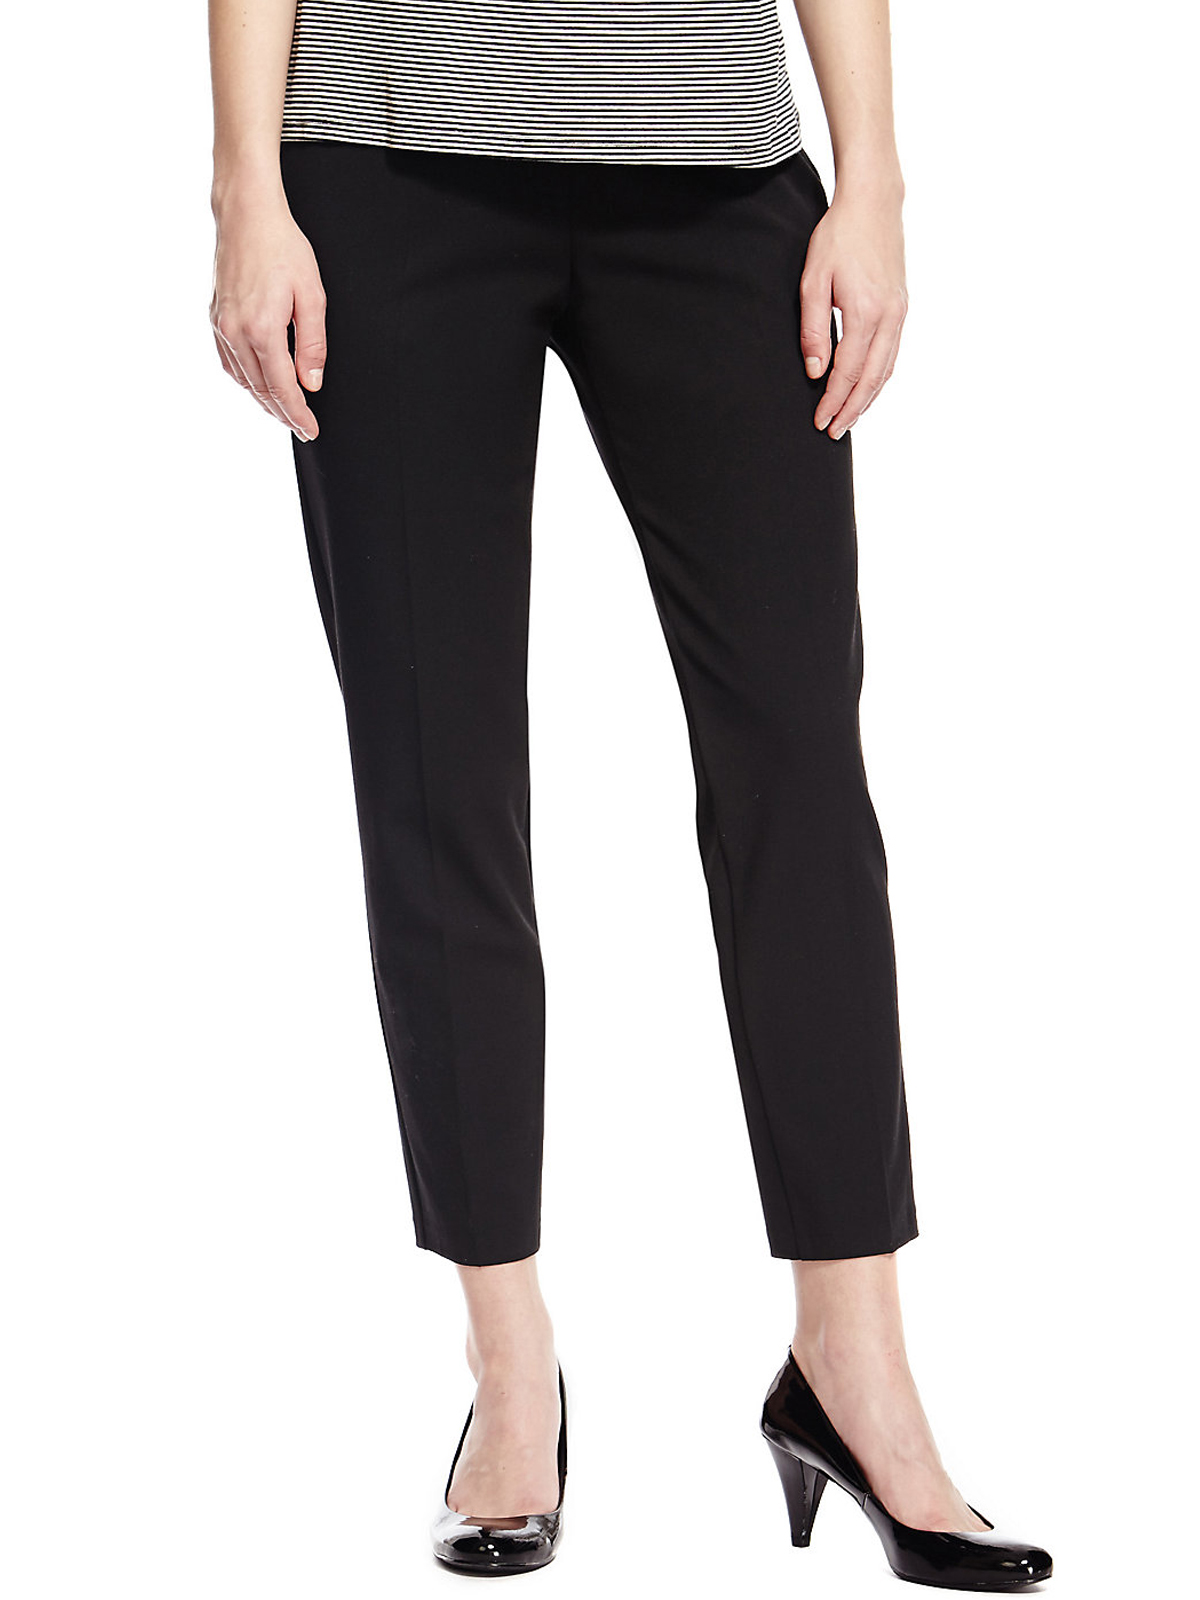 Marks and Spencer - - M&5 BLACK Straight Leg Ankle Grazer Trousers ...